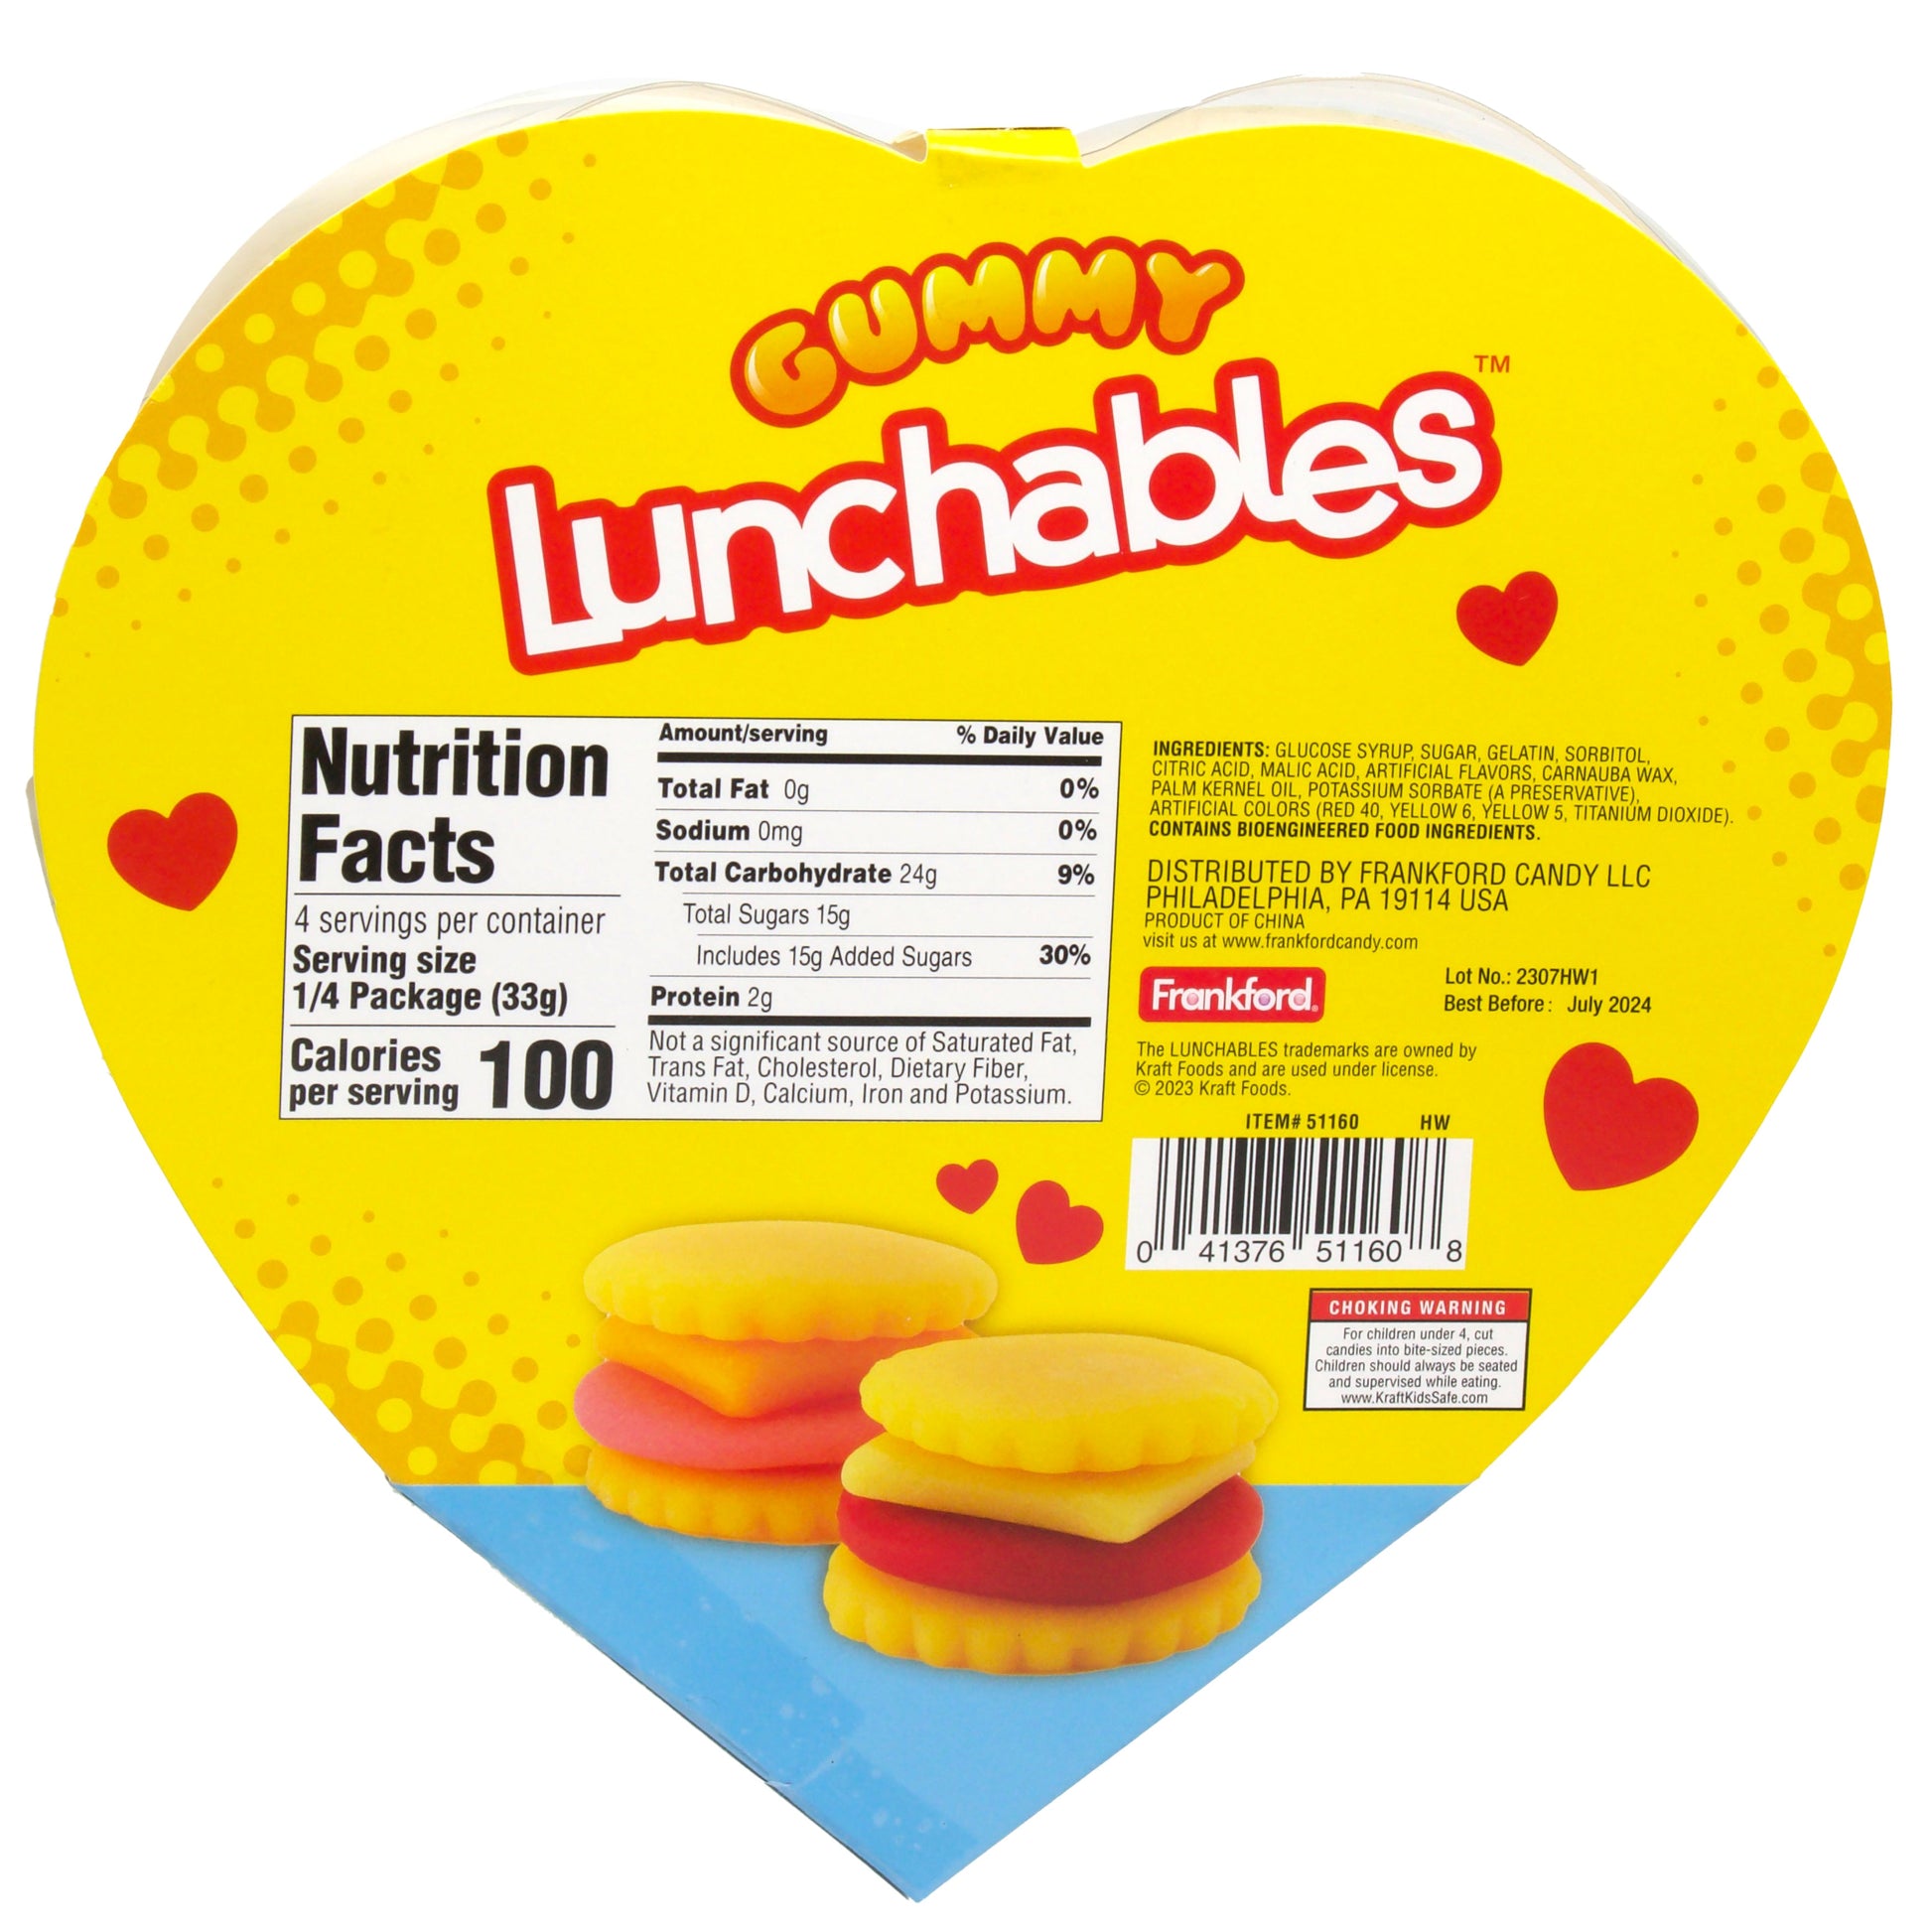 Back of yellow heart shaped box with nutrition facts and ingredients